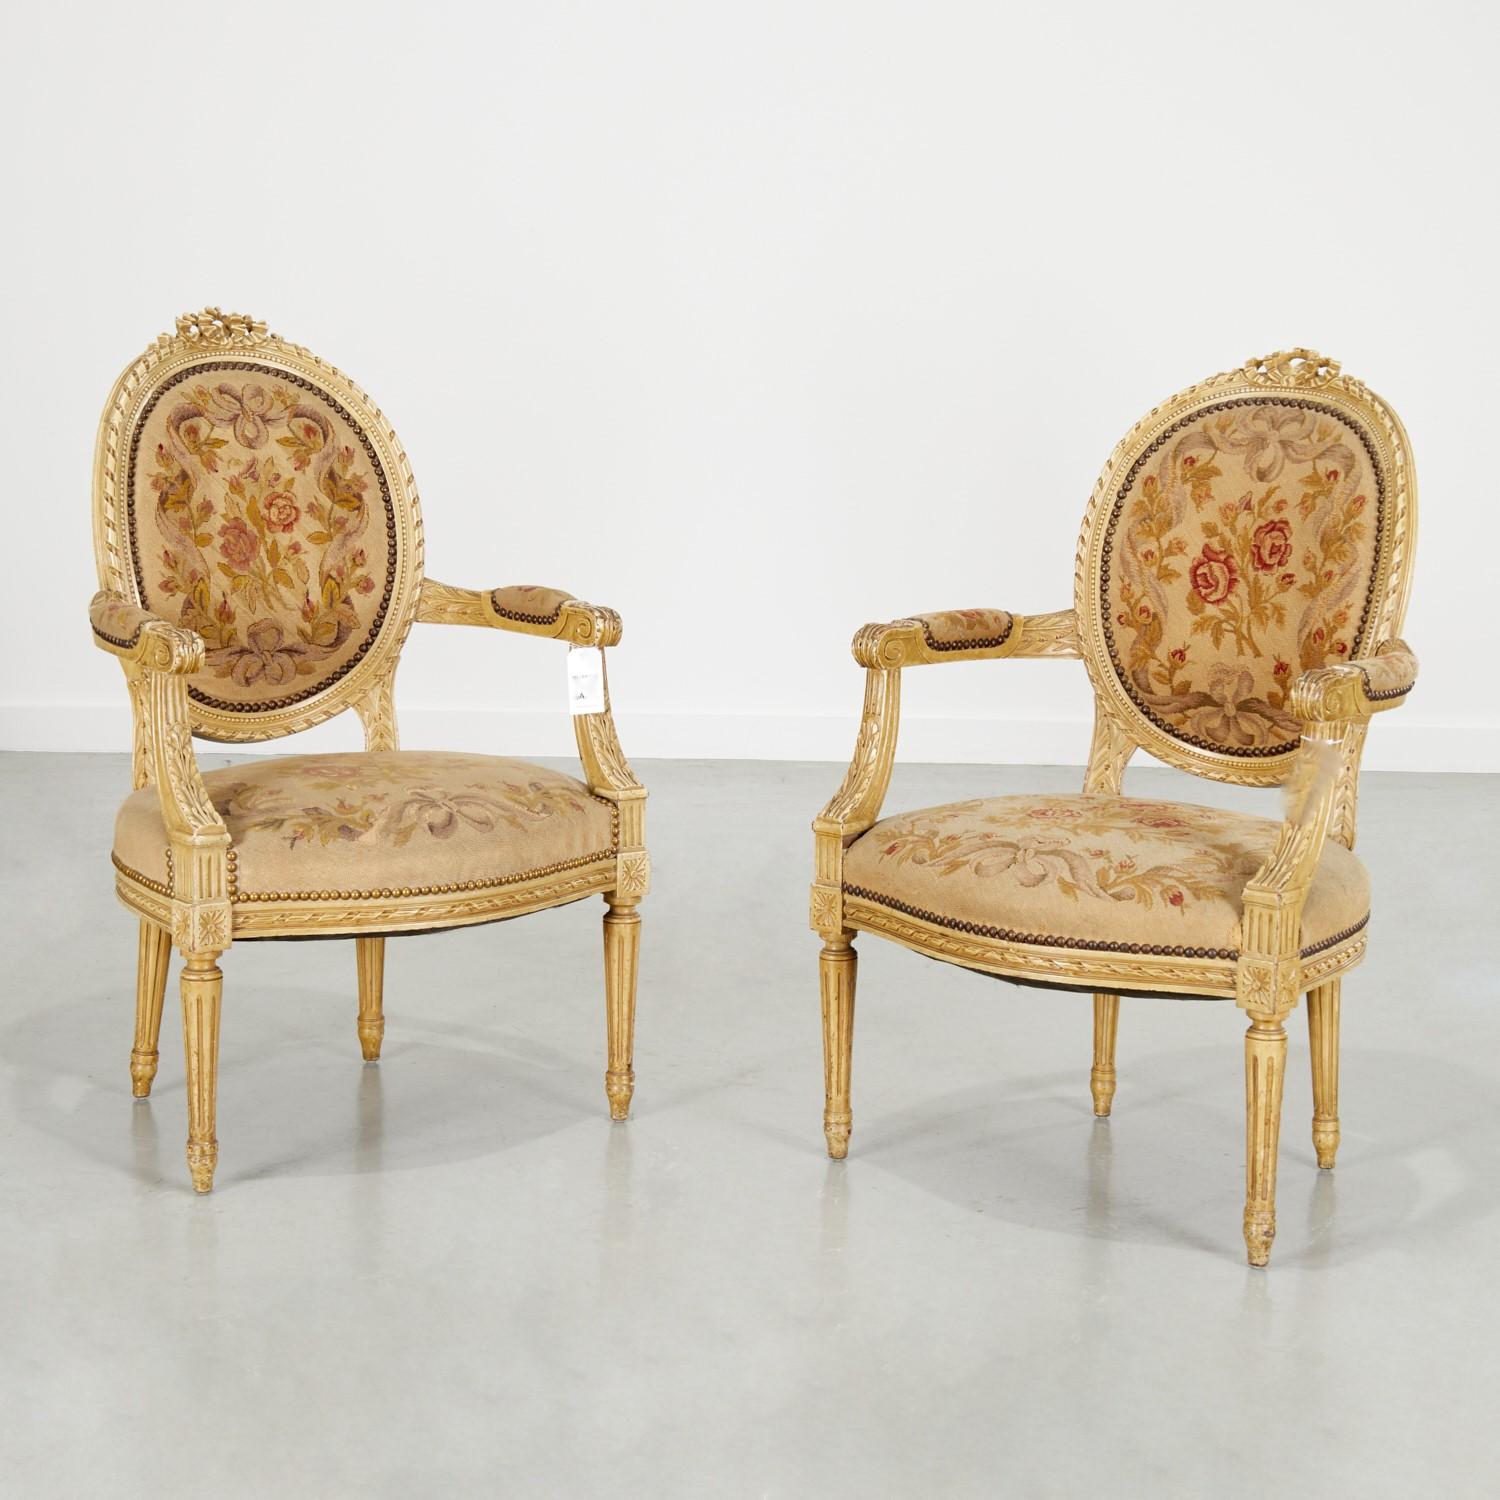 19th C., a Pair of Louis XVI Style Painted Carved Wood and Needlepoint Fauteuils For Sale 4